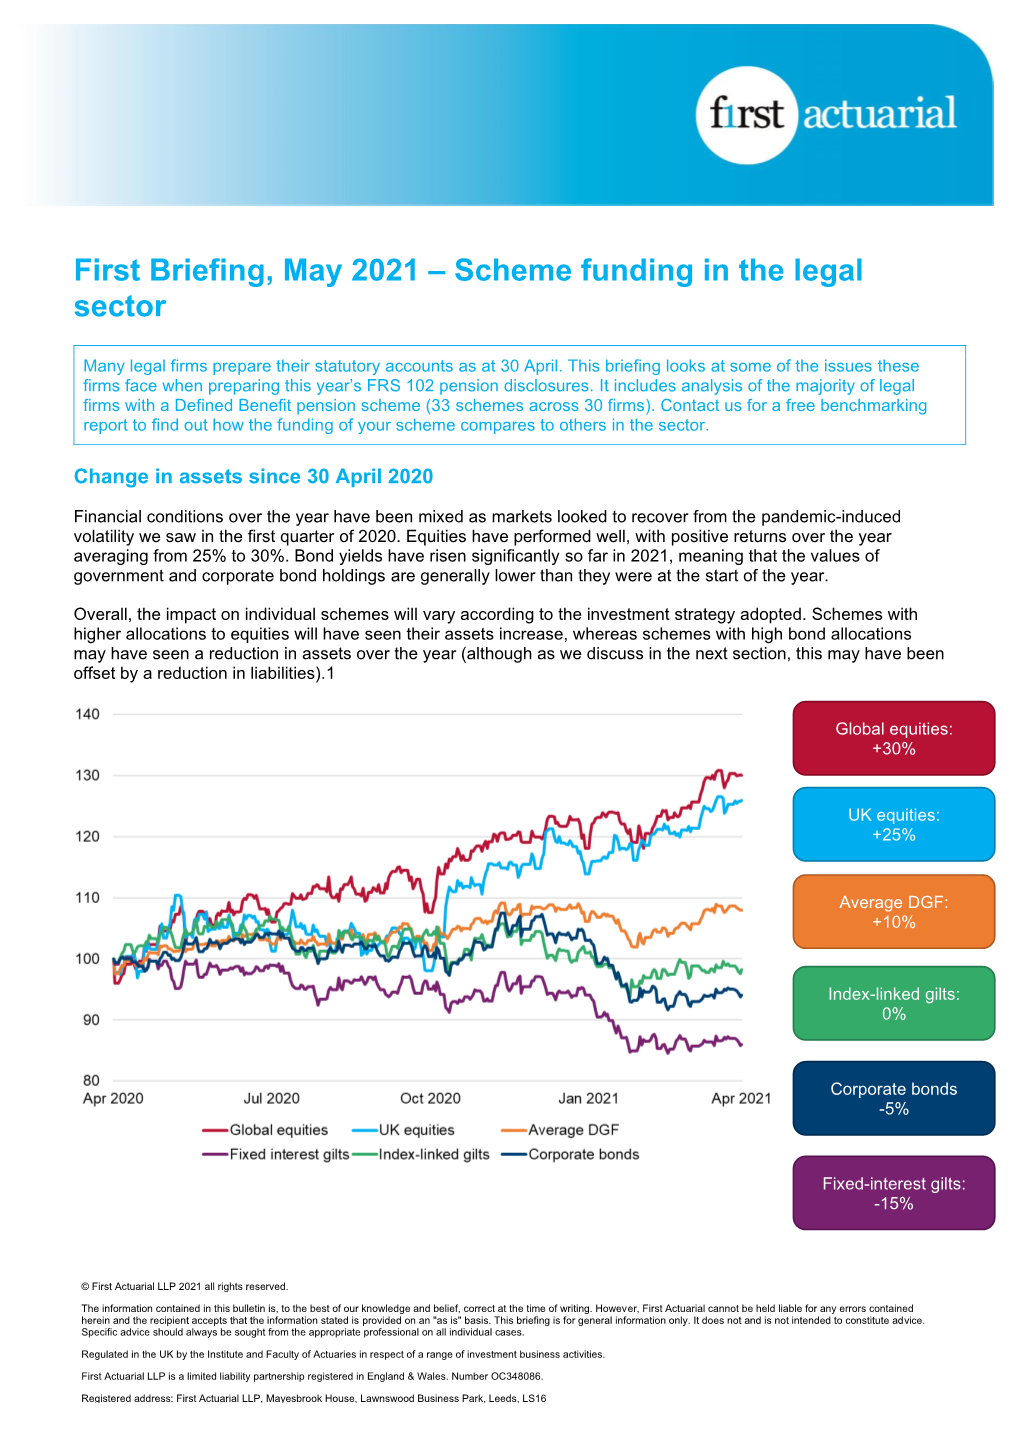 First Briefing, May 2021 – Scheme Funding in the Legal Sector